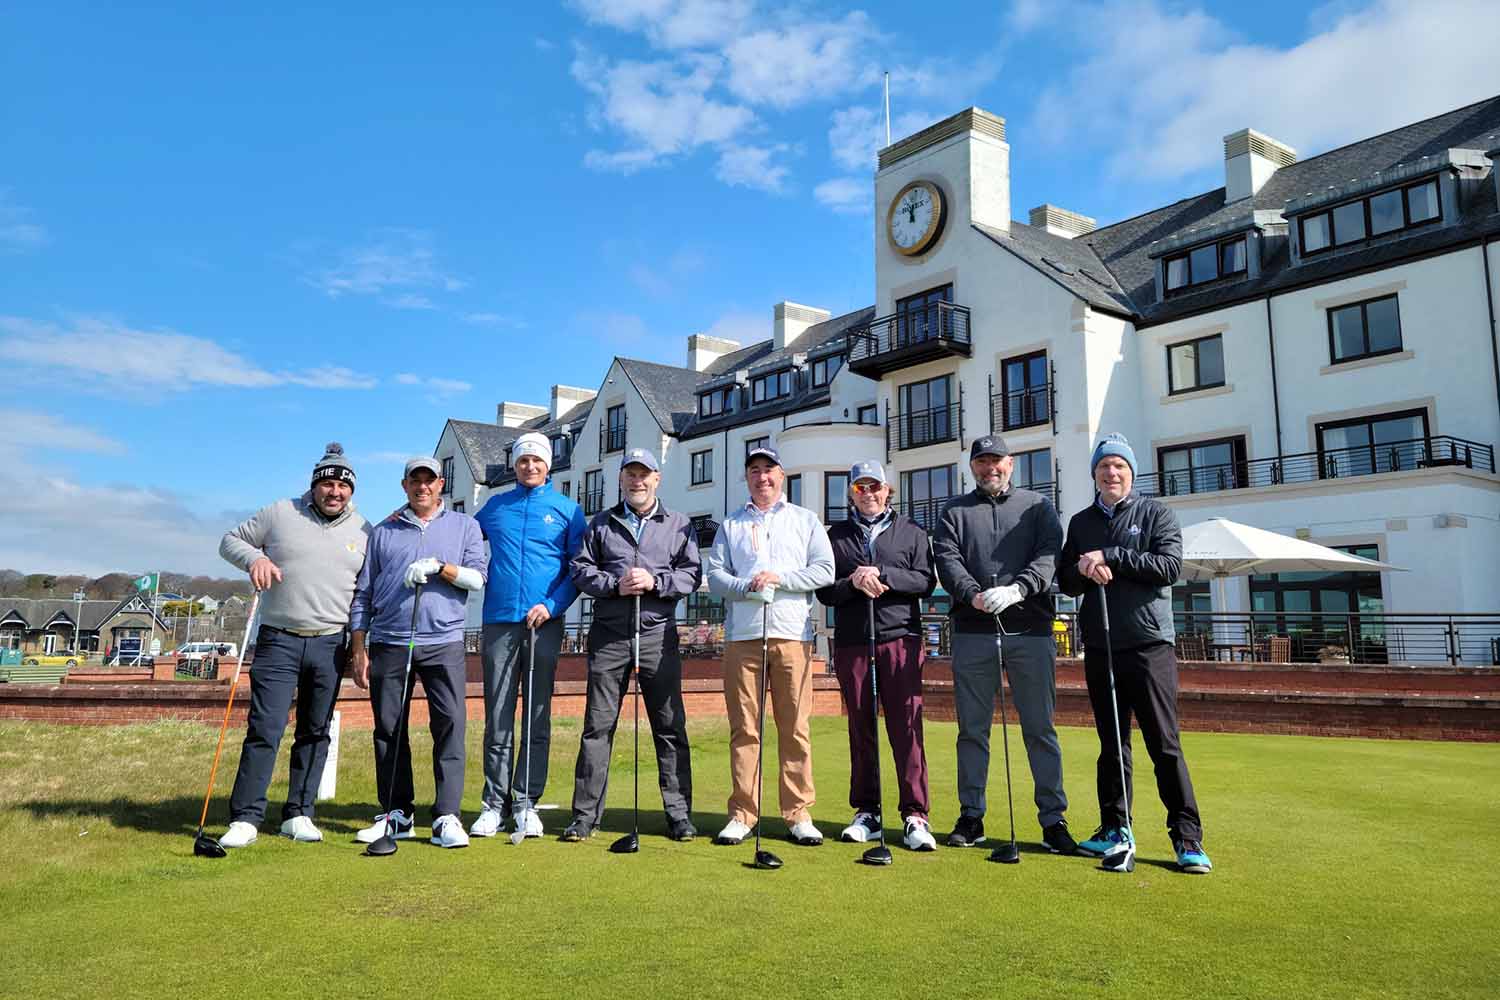 Tips for First Golf Trip to Scotland